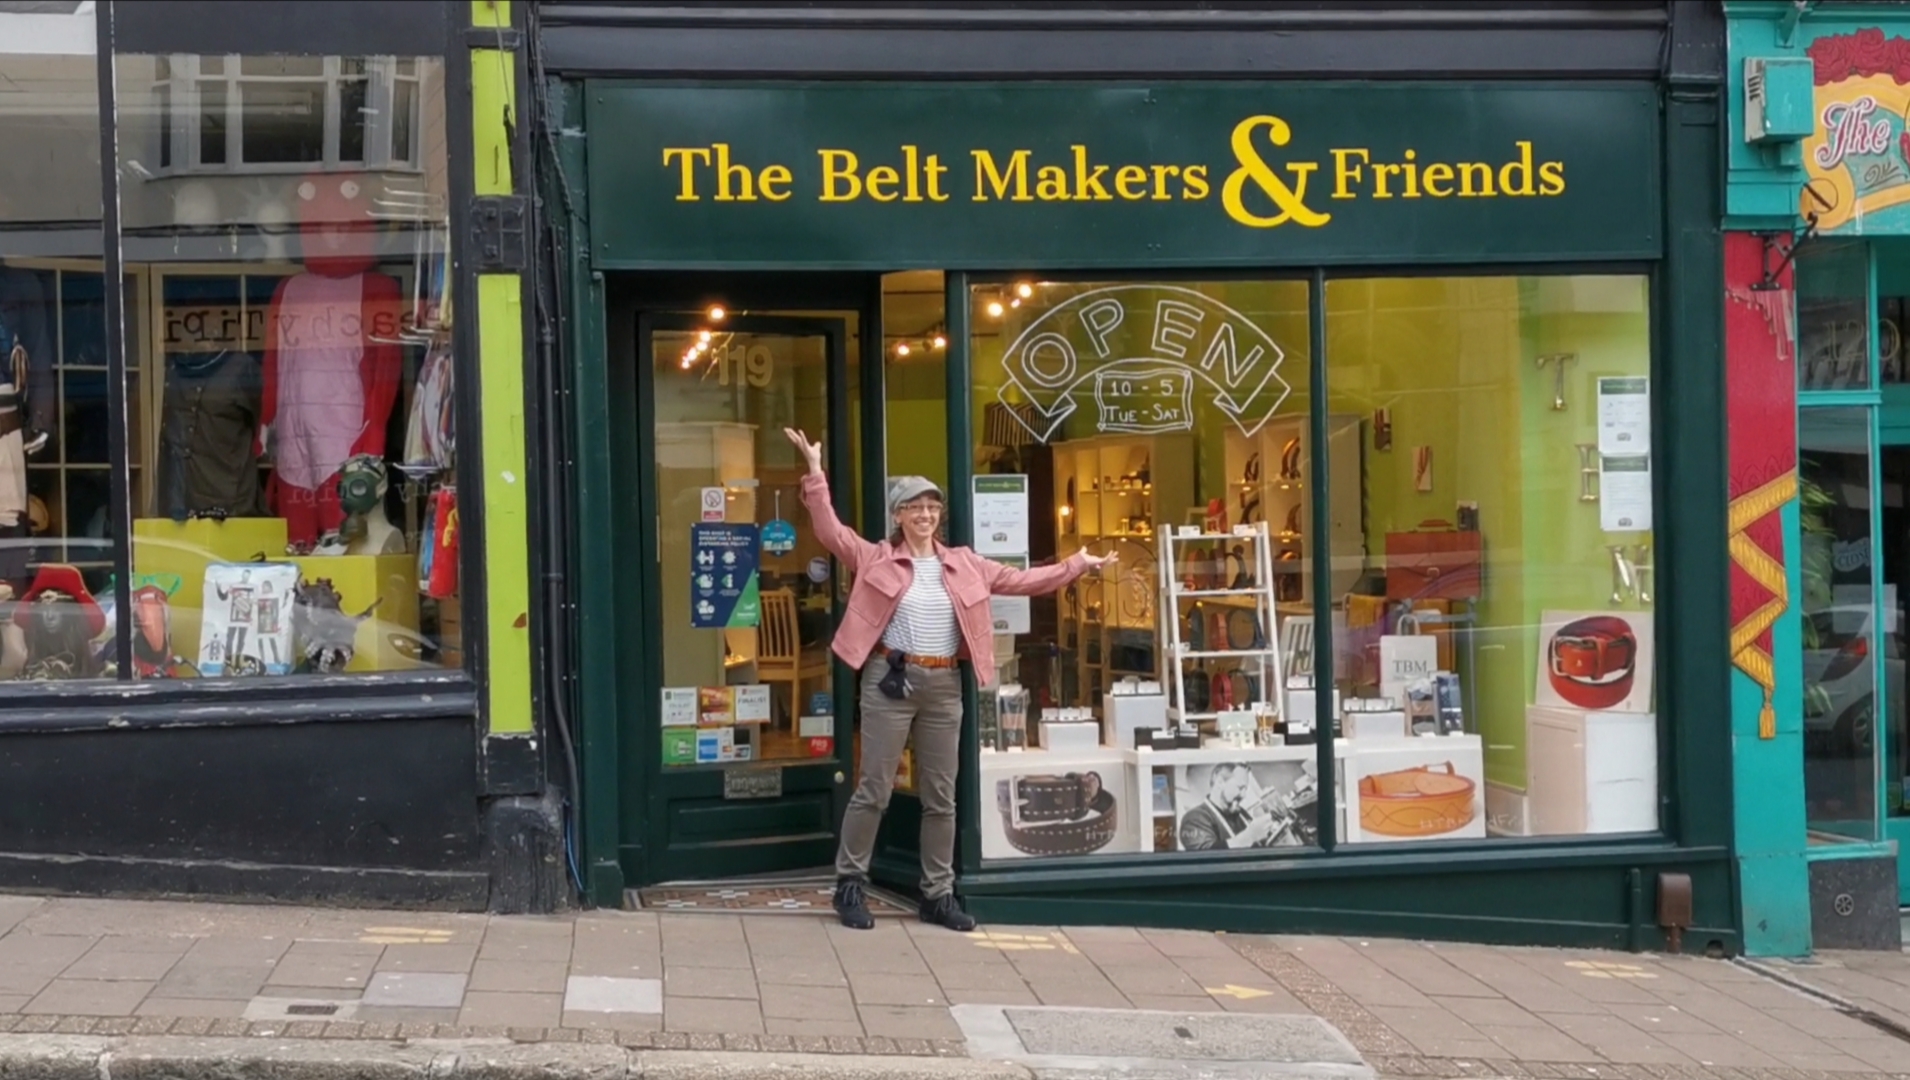 Video thumbnail of me outside the rebranded shop front